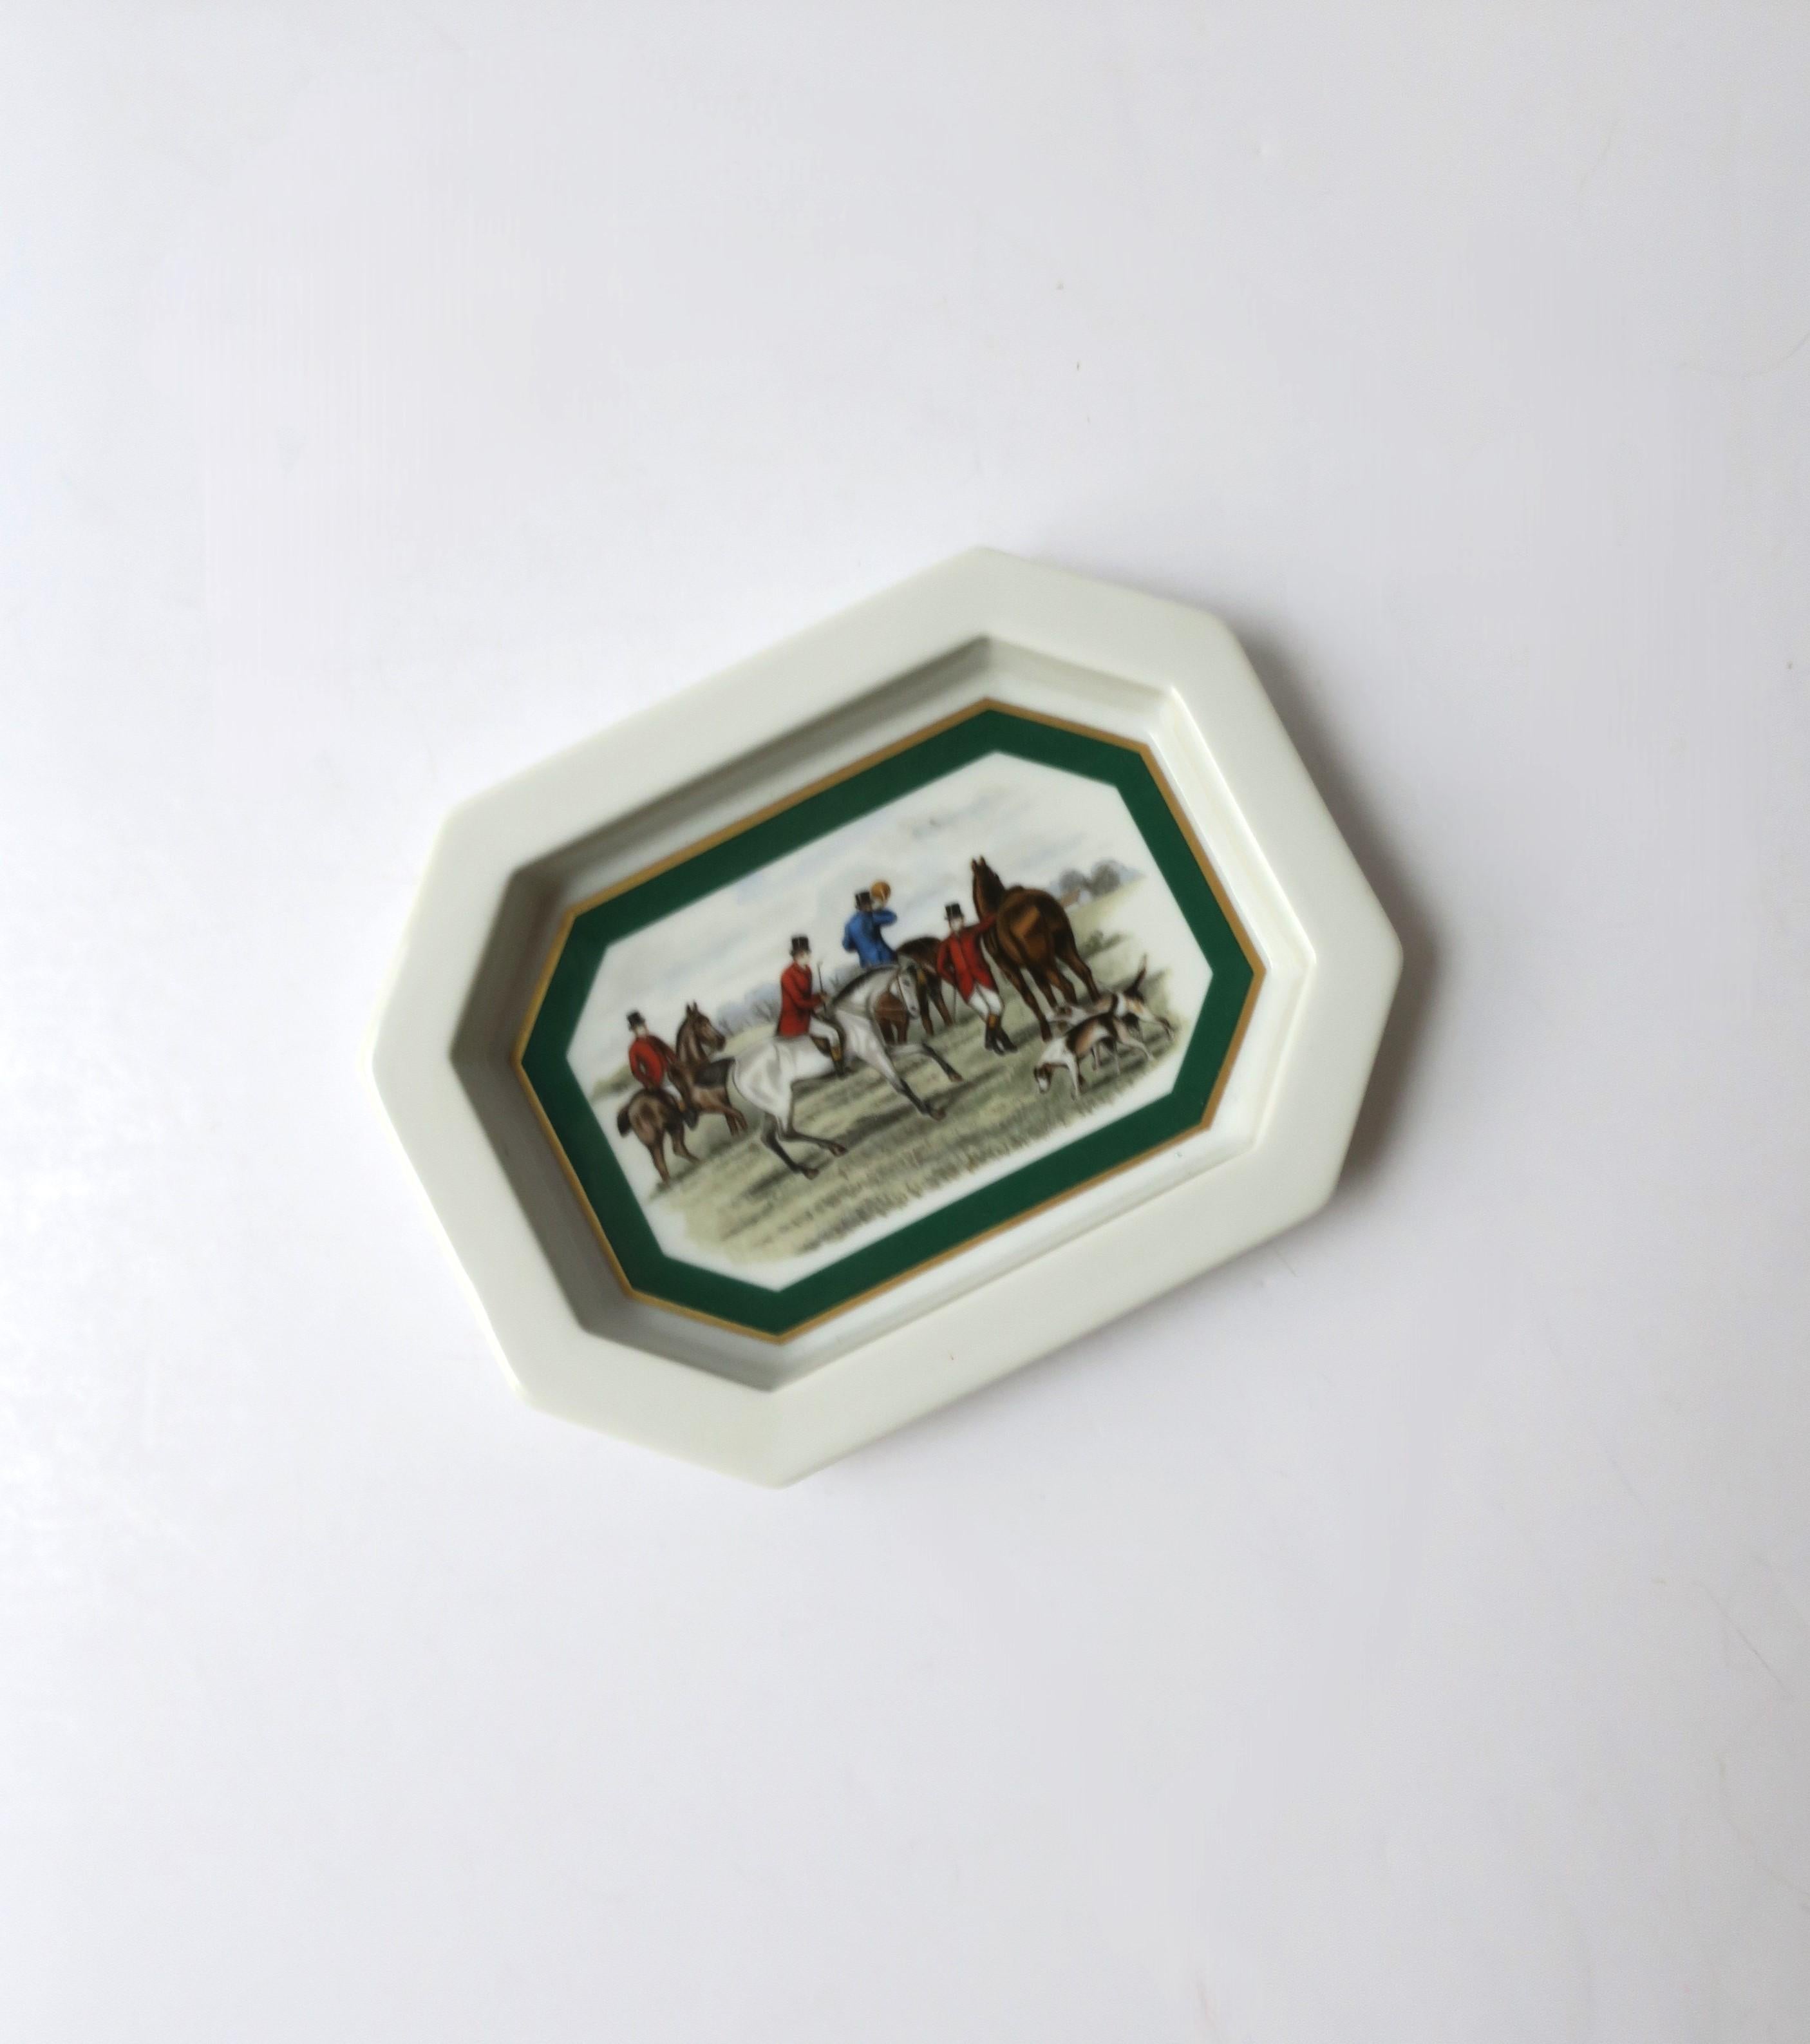 Glazed Porcelain Jewelry Dish with Equestrian Horse Scene For Sale